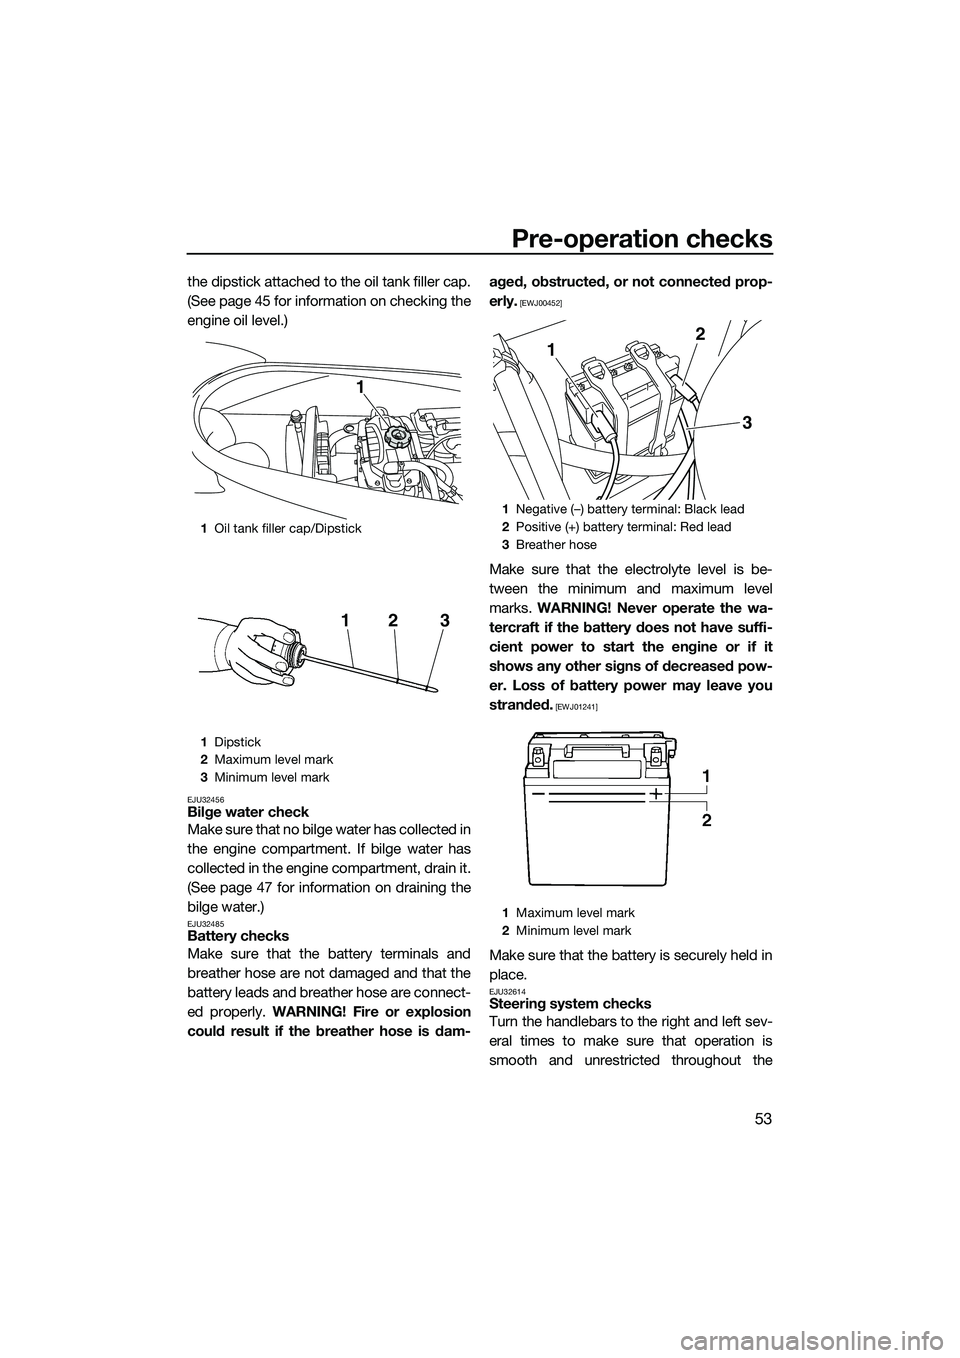 YAMAHA VX CRUISER 2014  Owners Manual Pre-operation checks
53
the dipstick attached to the oil tank filler cap.
(See page 45 for information on checking the
engine oil level.)
EJU32456Bilge water check
Make sure that no bilge water has co